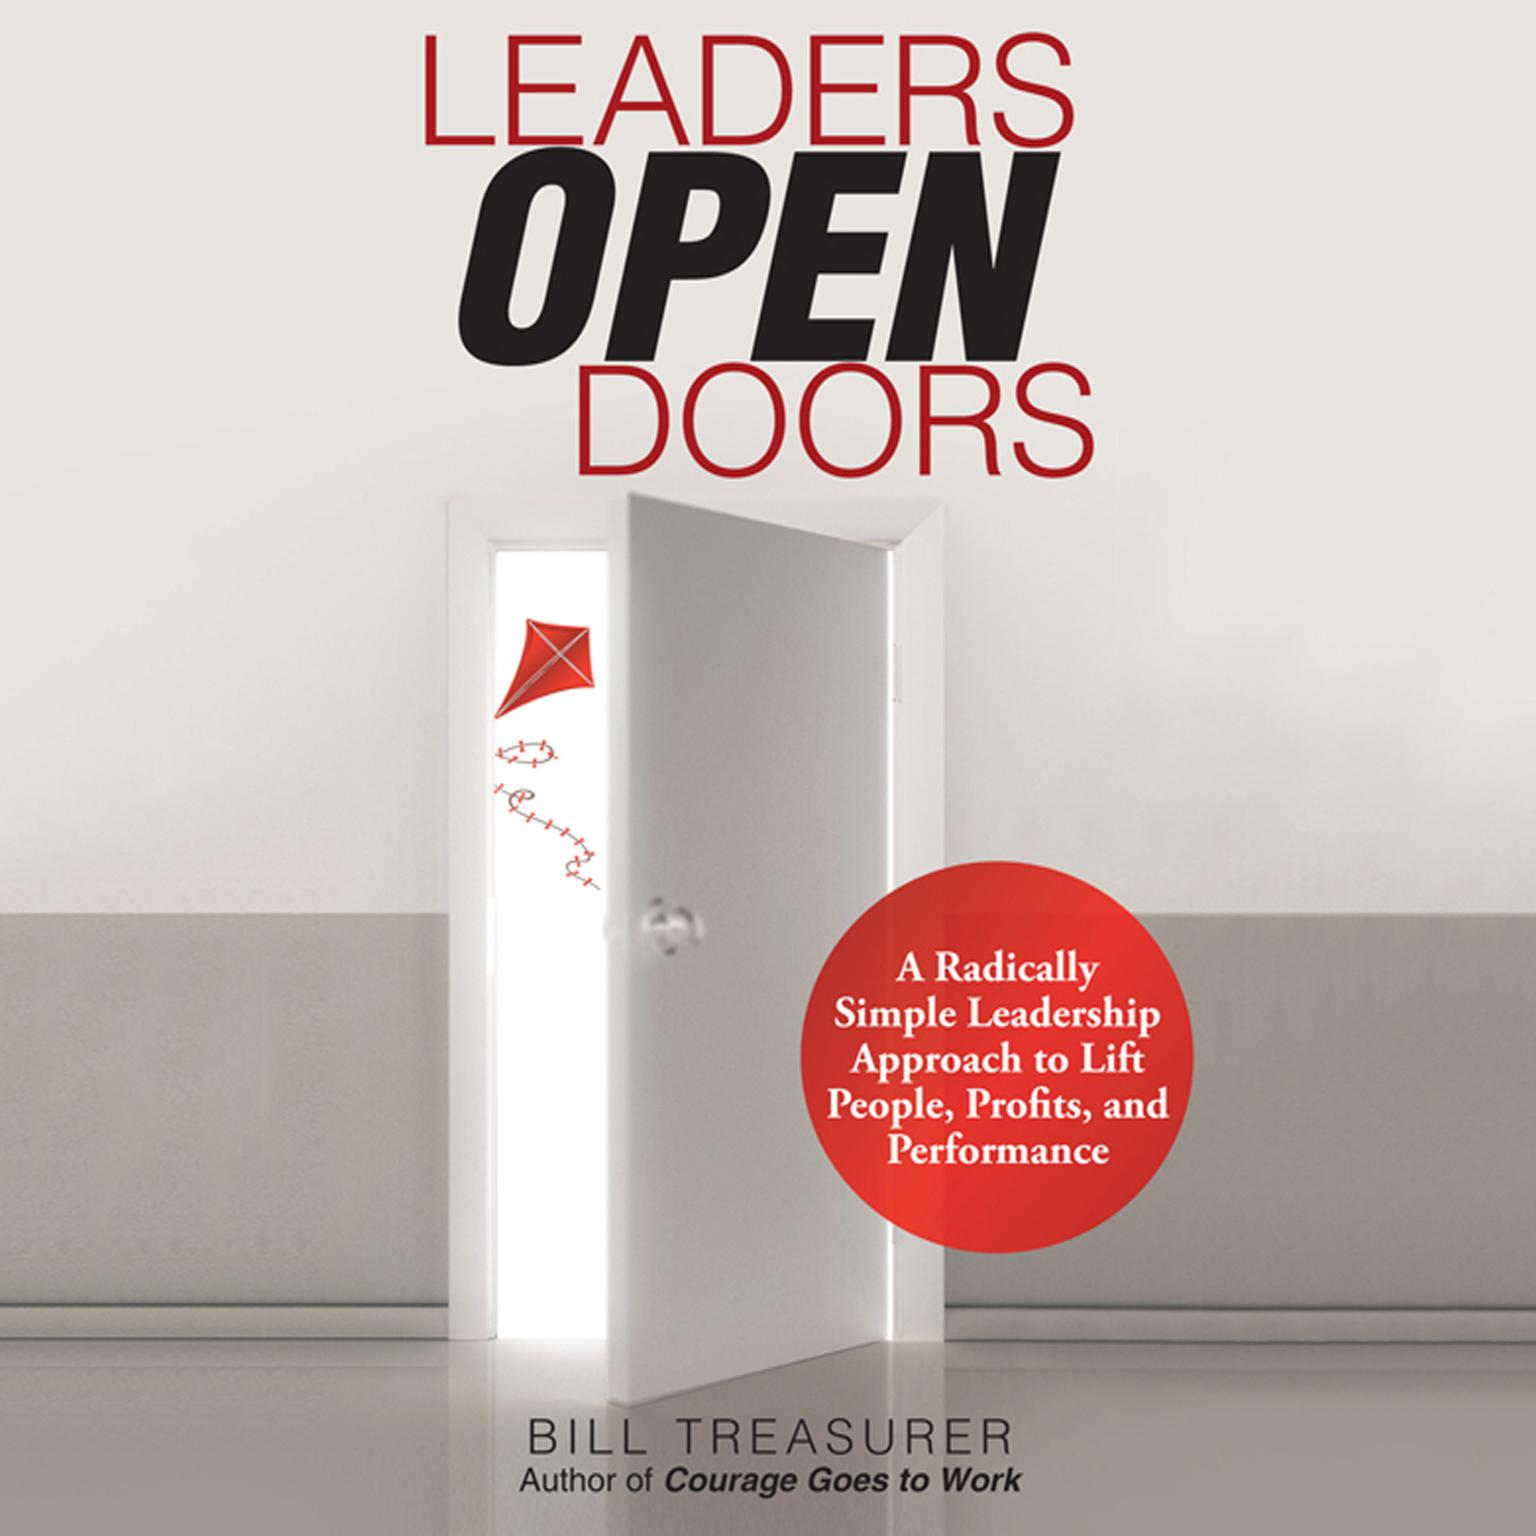 Leaders Open Doors: A Radically Simple Leadership Approach to Lift People, Profits, and Performance Audiobook, by Bill Treasurer